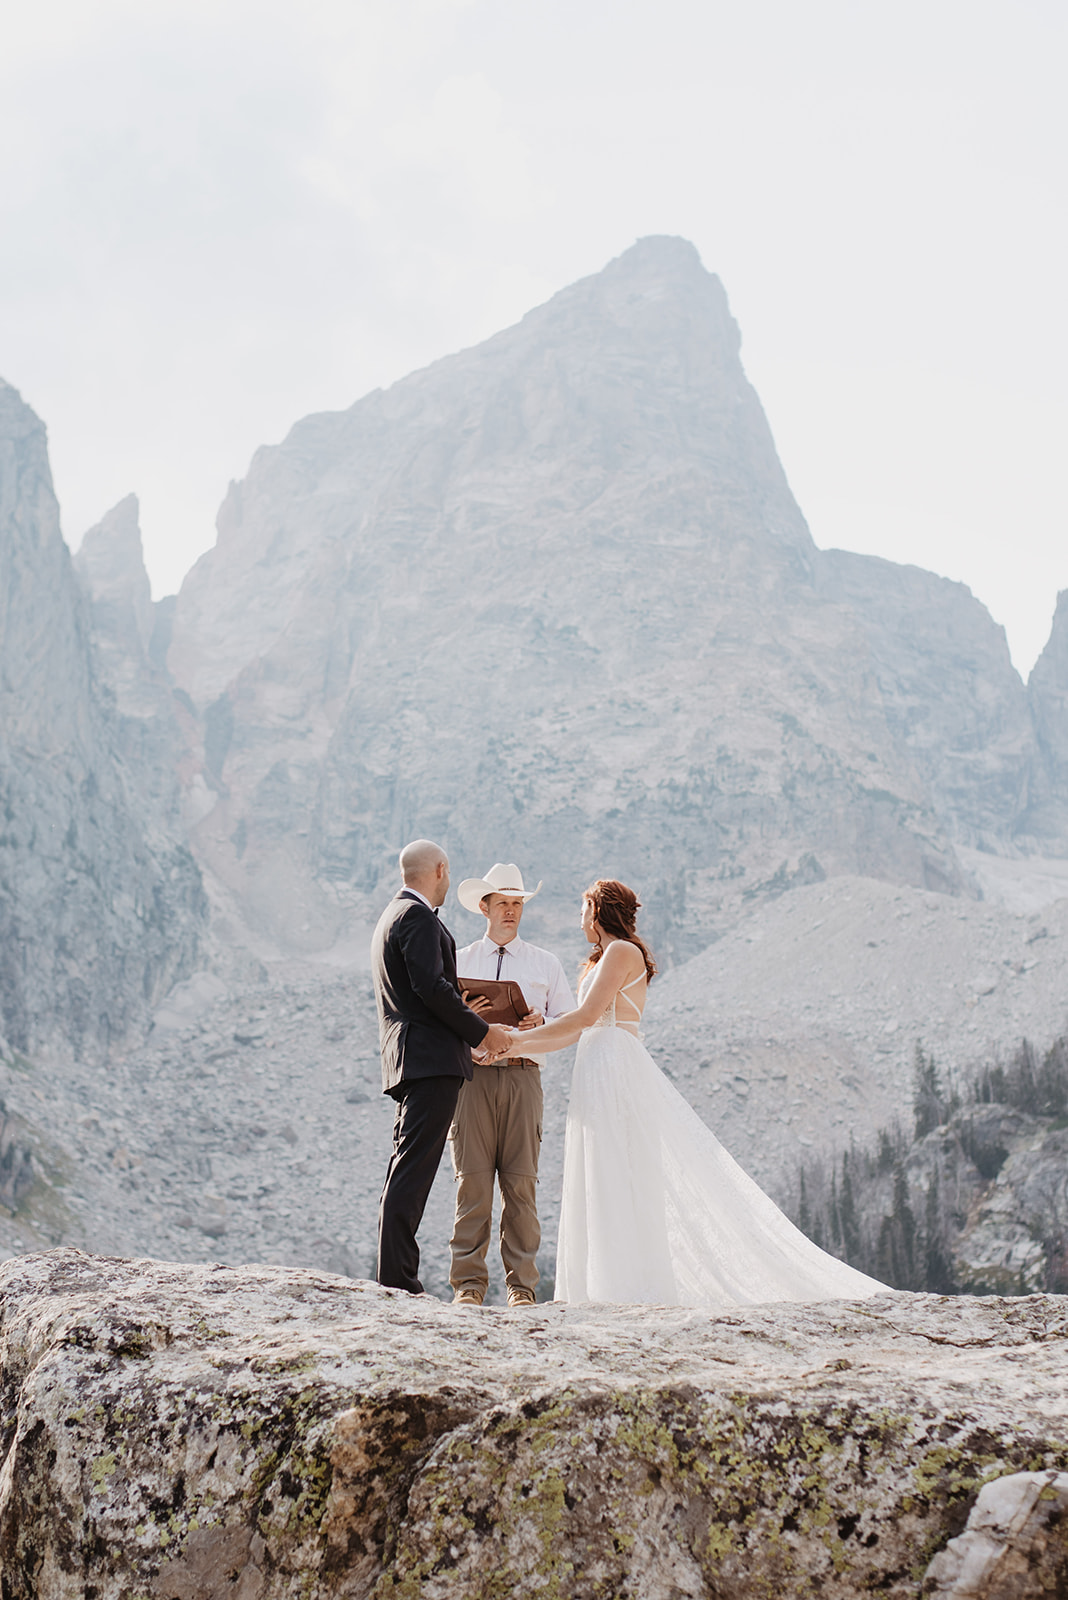 Delta Lake elopement in the Tetons with bride and groom standning on a boulder with their wedding officiant with the Grand Tetons mountains behind them for an adventure elopement